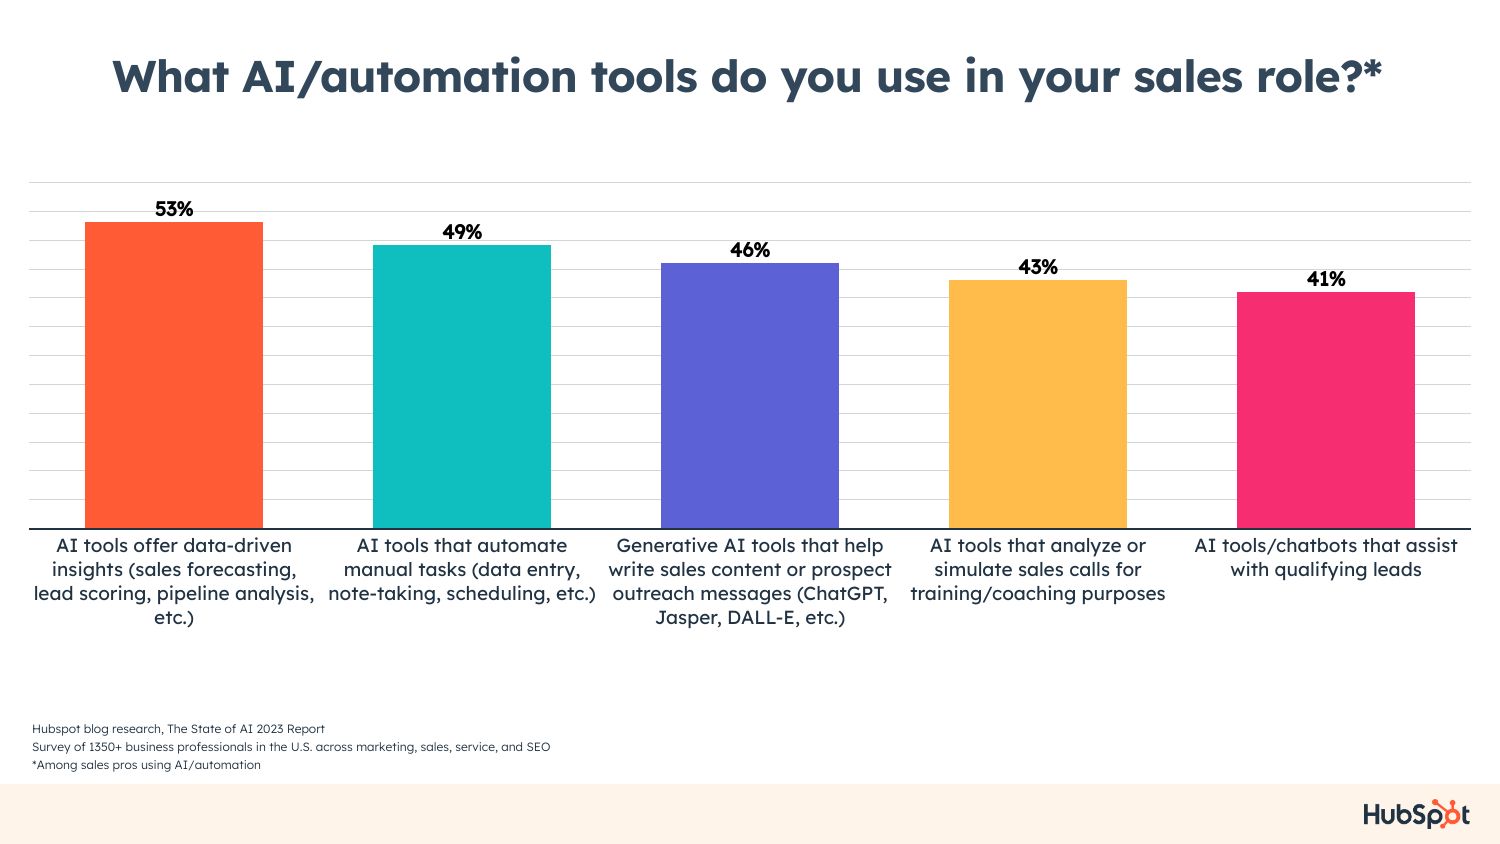 AI/automation tools used in B2B sales